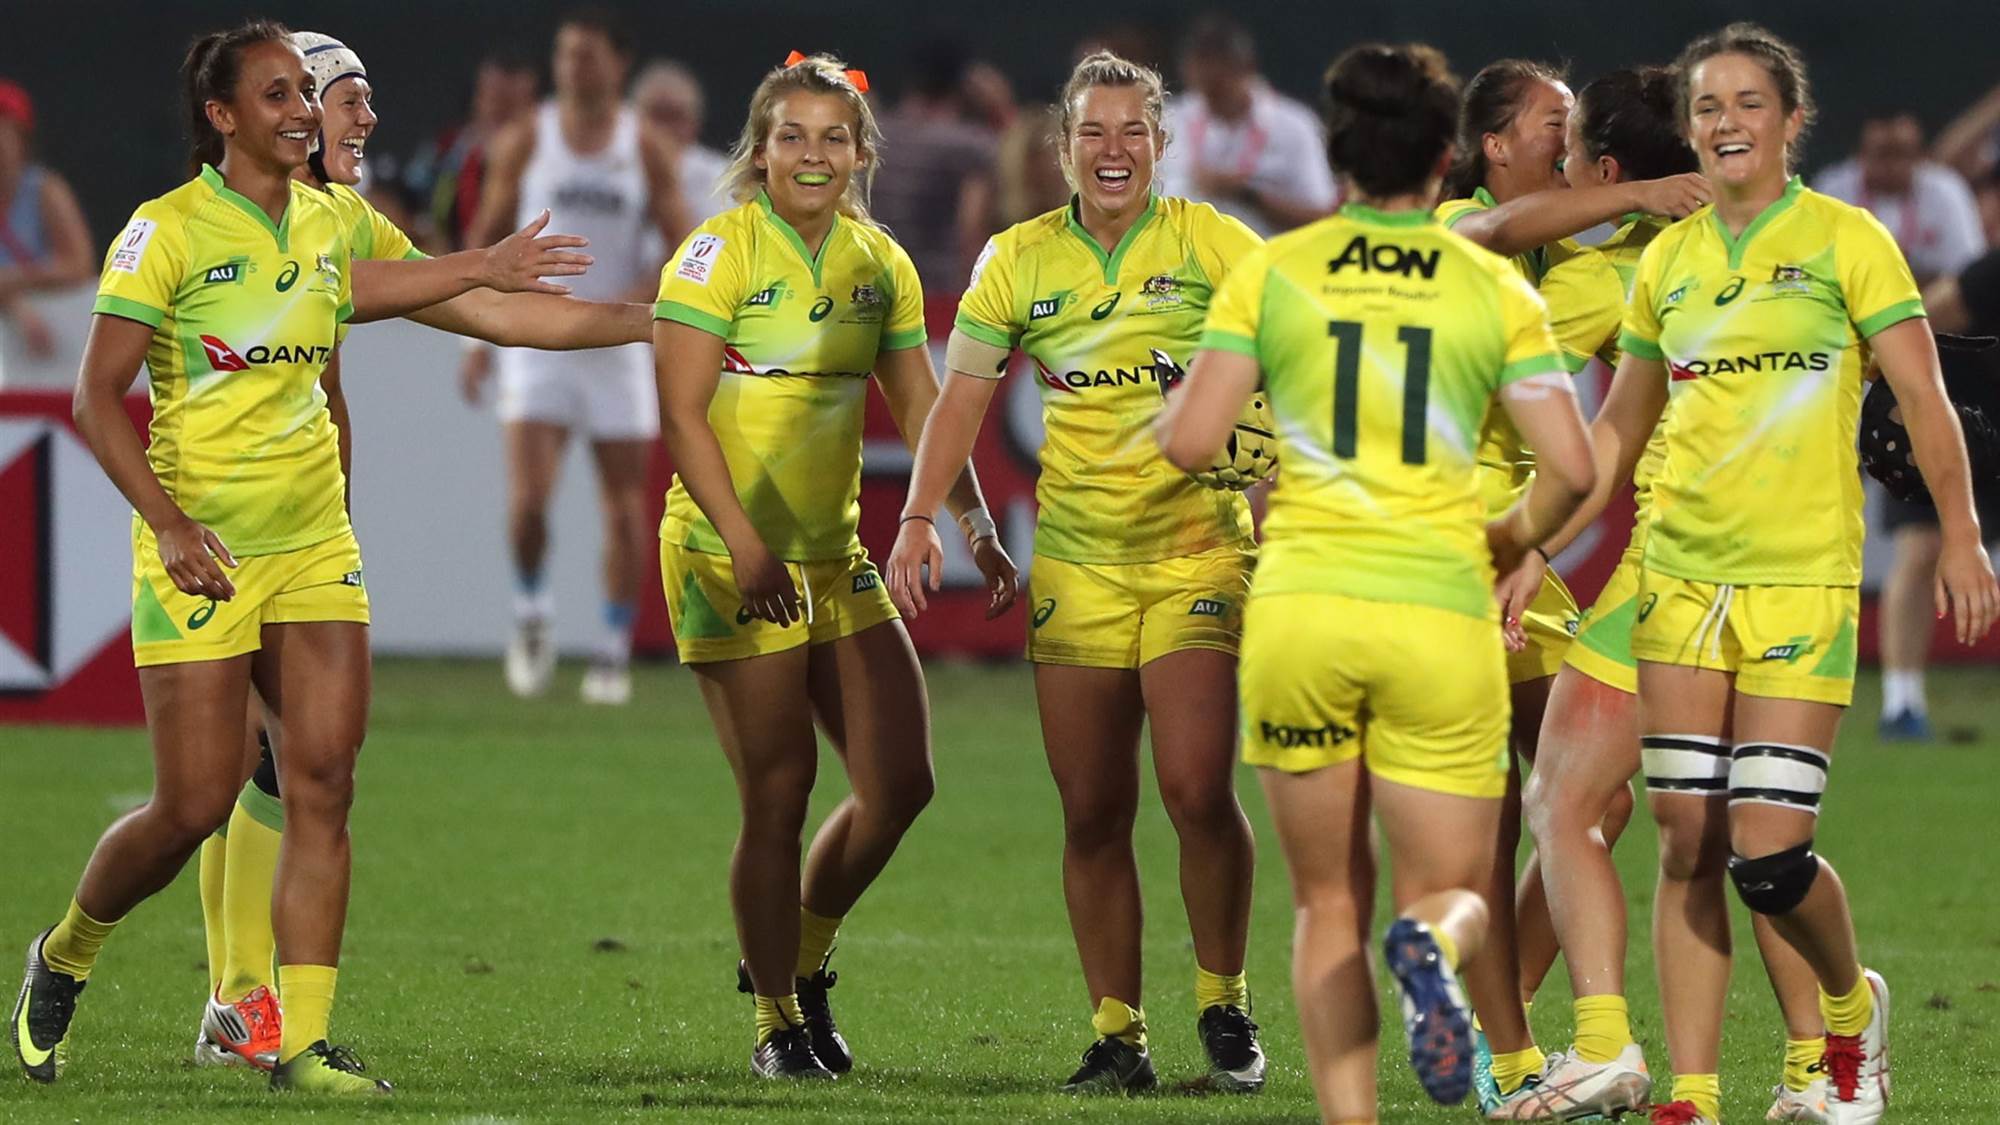 Rugby 7s team announced for Commonwealth Games - The Womens Game - Australias Home of Womens Sport News